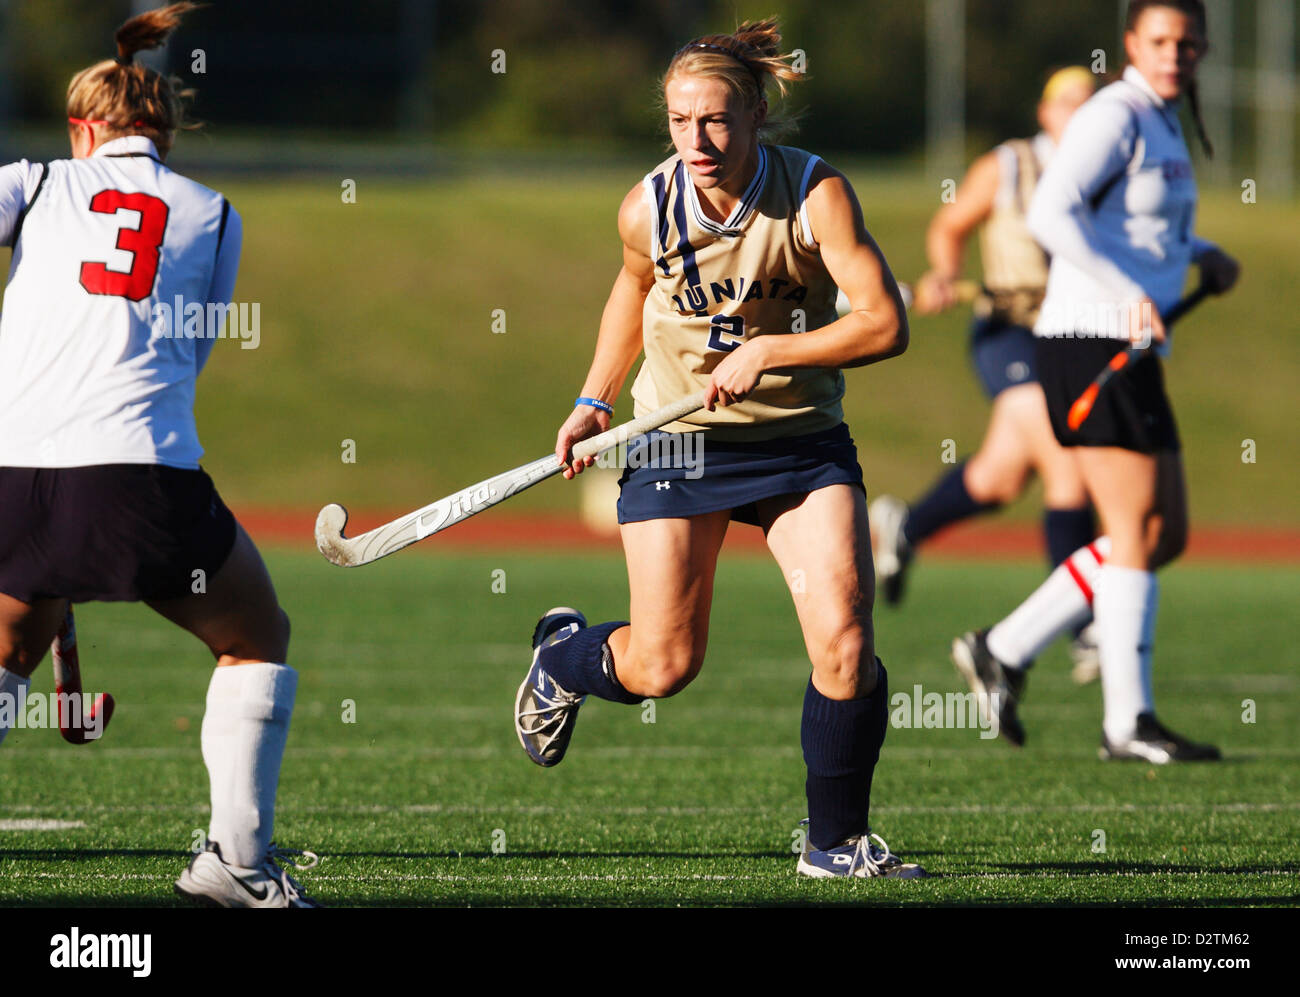 A Juniata College player (2) in action during the Landmark Conference field hockey championship against Catholic University. Stock Photo